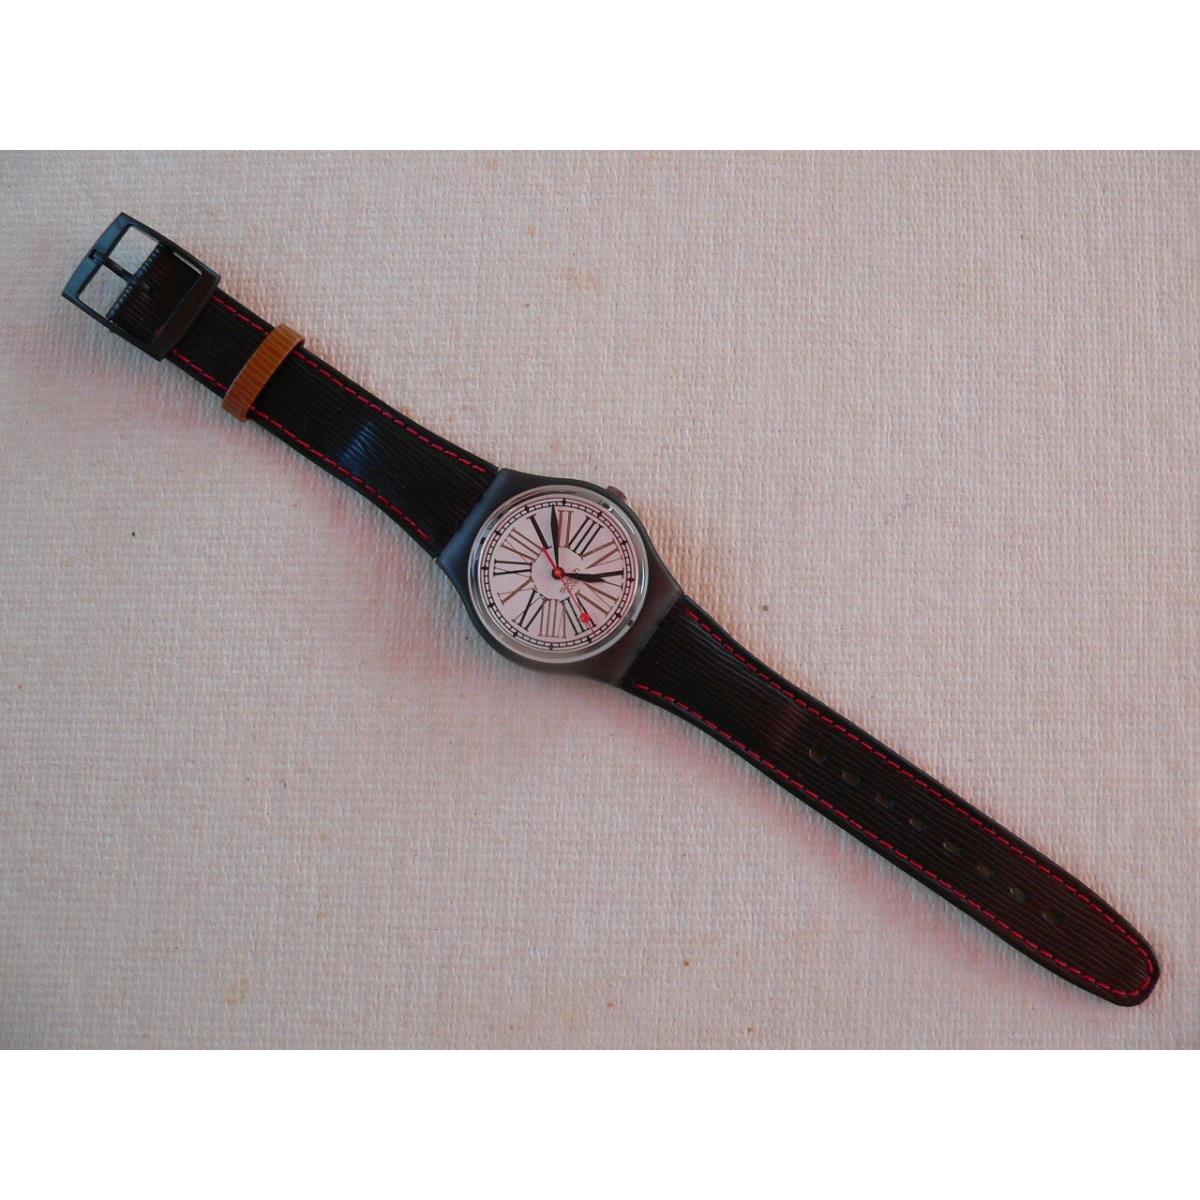 Swatch watch  - Multi-Color Dial, Black Band 0